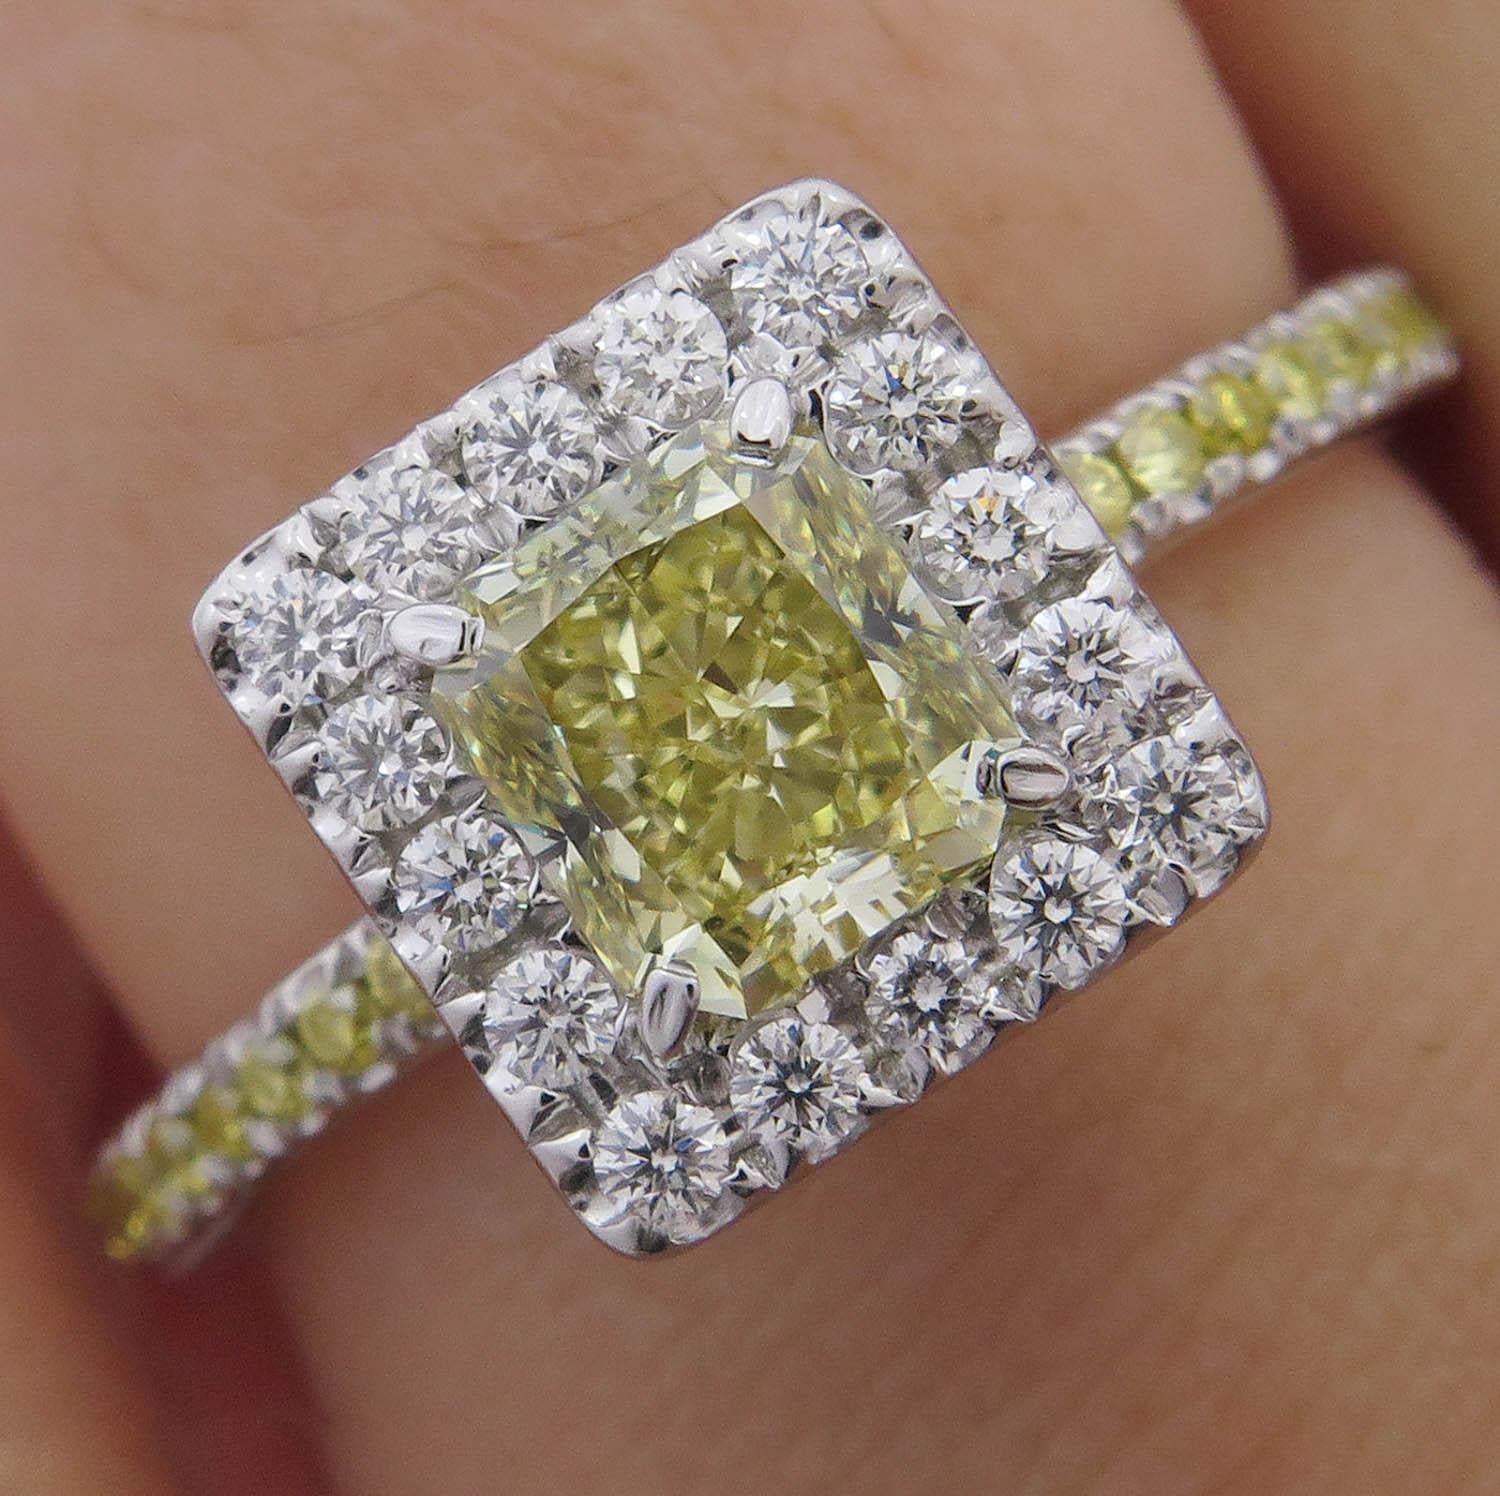 Very Elegant and Beautiful Estate Vintage Diamond Ring with 1.05ct Radiant Center Diamond GIA Certified as FANCY YELLOW Color, VS2 clarity (very clear).
Beautiful Color, Even color distribution, super Brilliant, a very Fine Rich NATURAL Diamond with